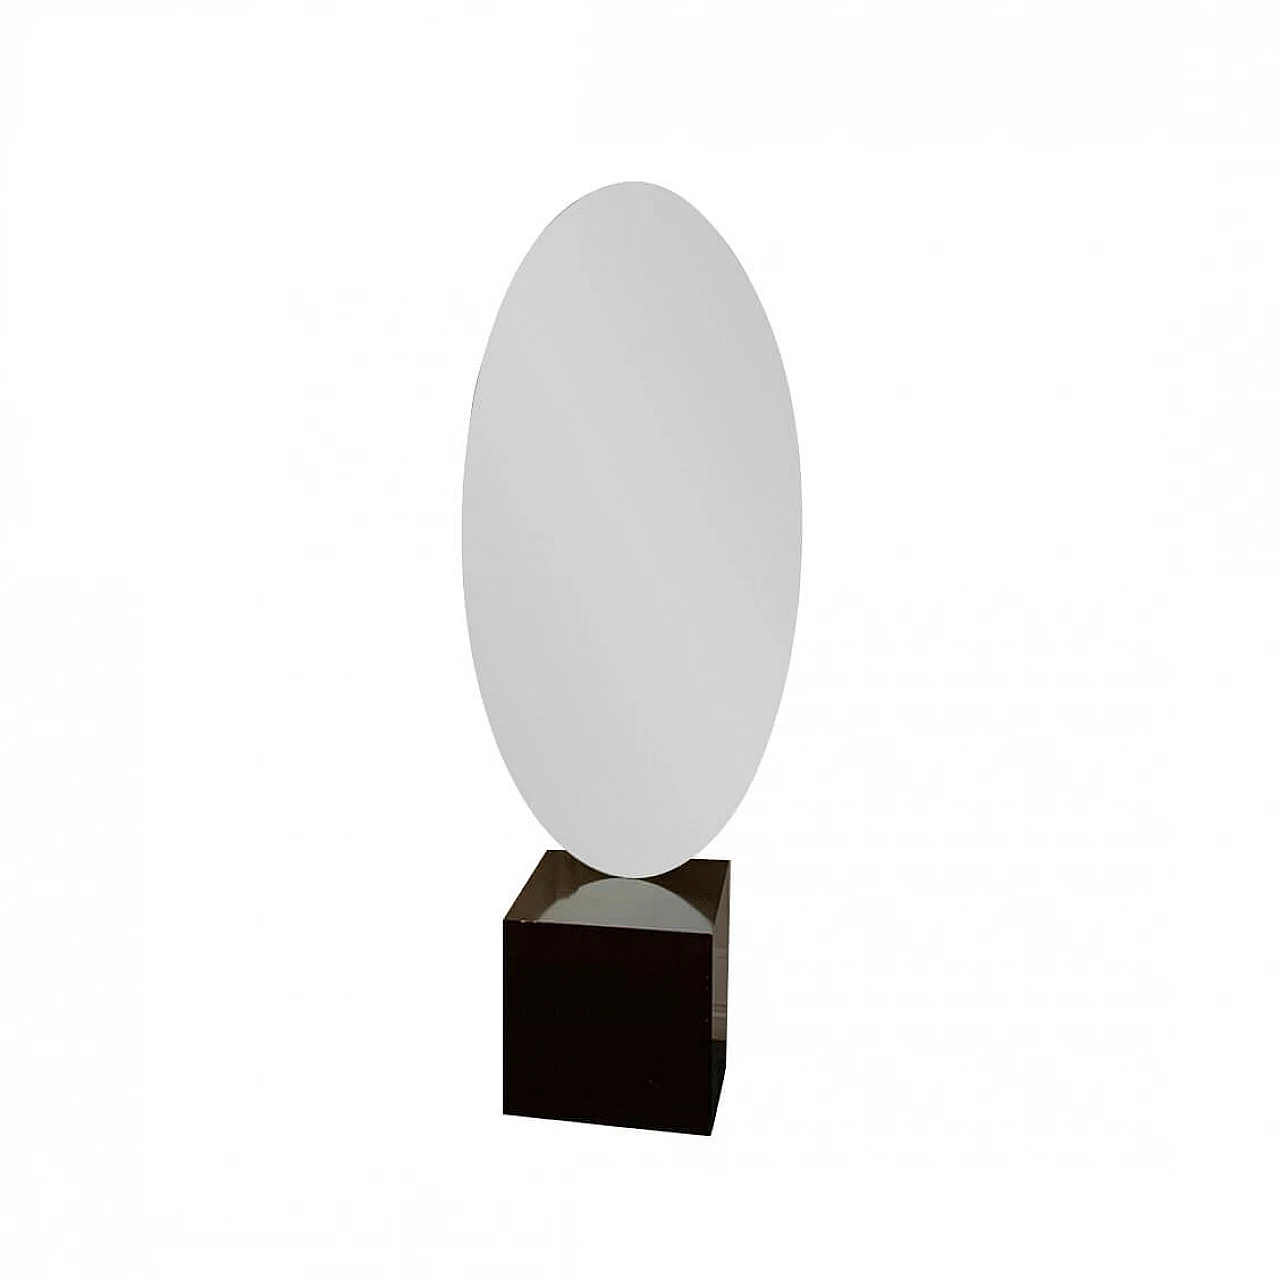 Oval mirror with drawing, 1970s 1096940